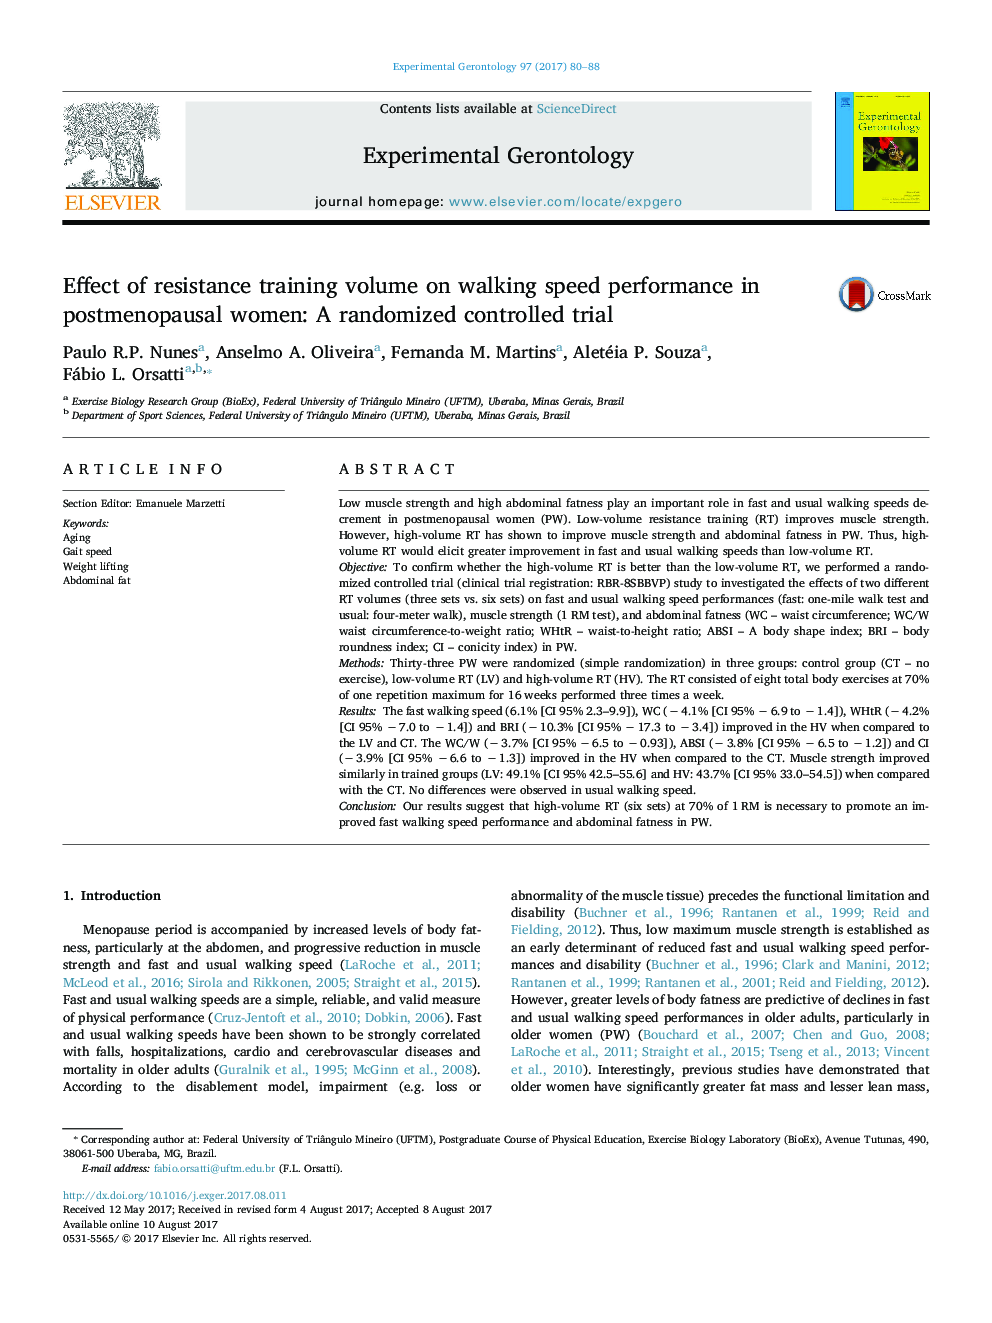 Effect of resistance training volume on walking speed performance in postmenopausal women: A randomized controlled trial